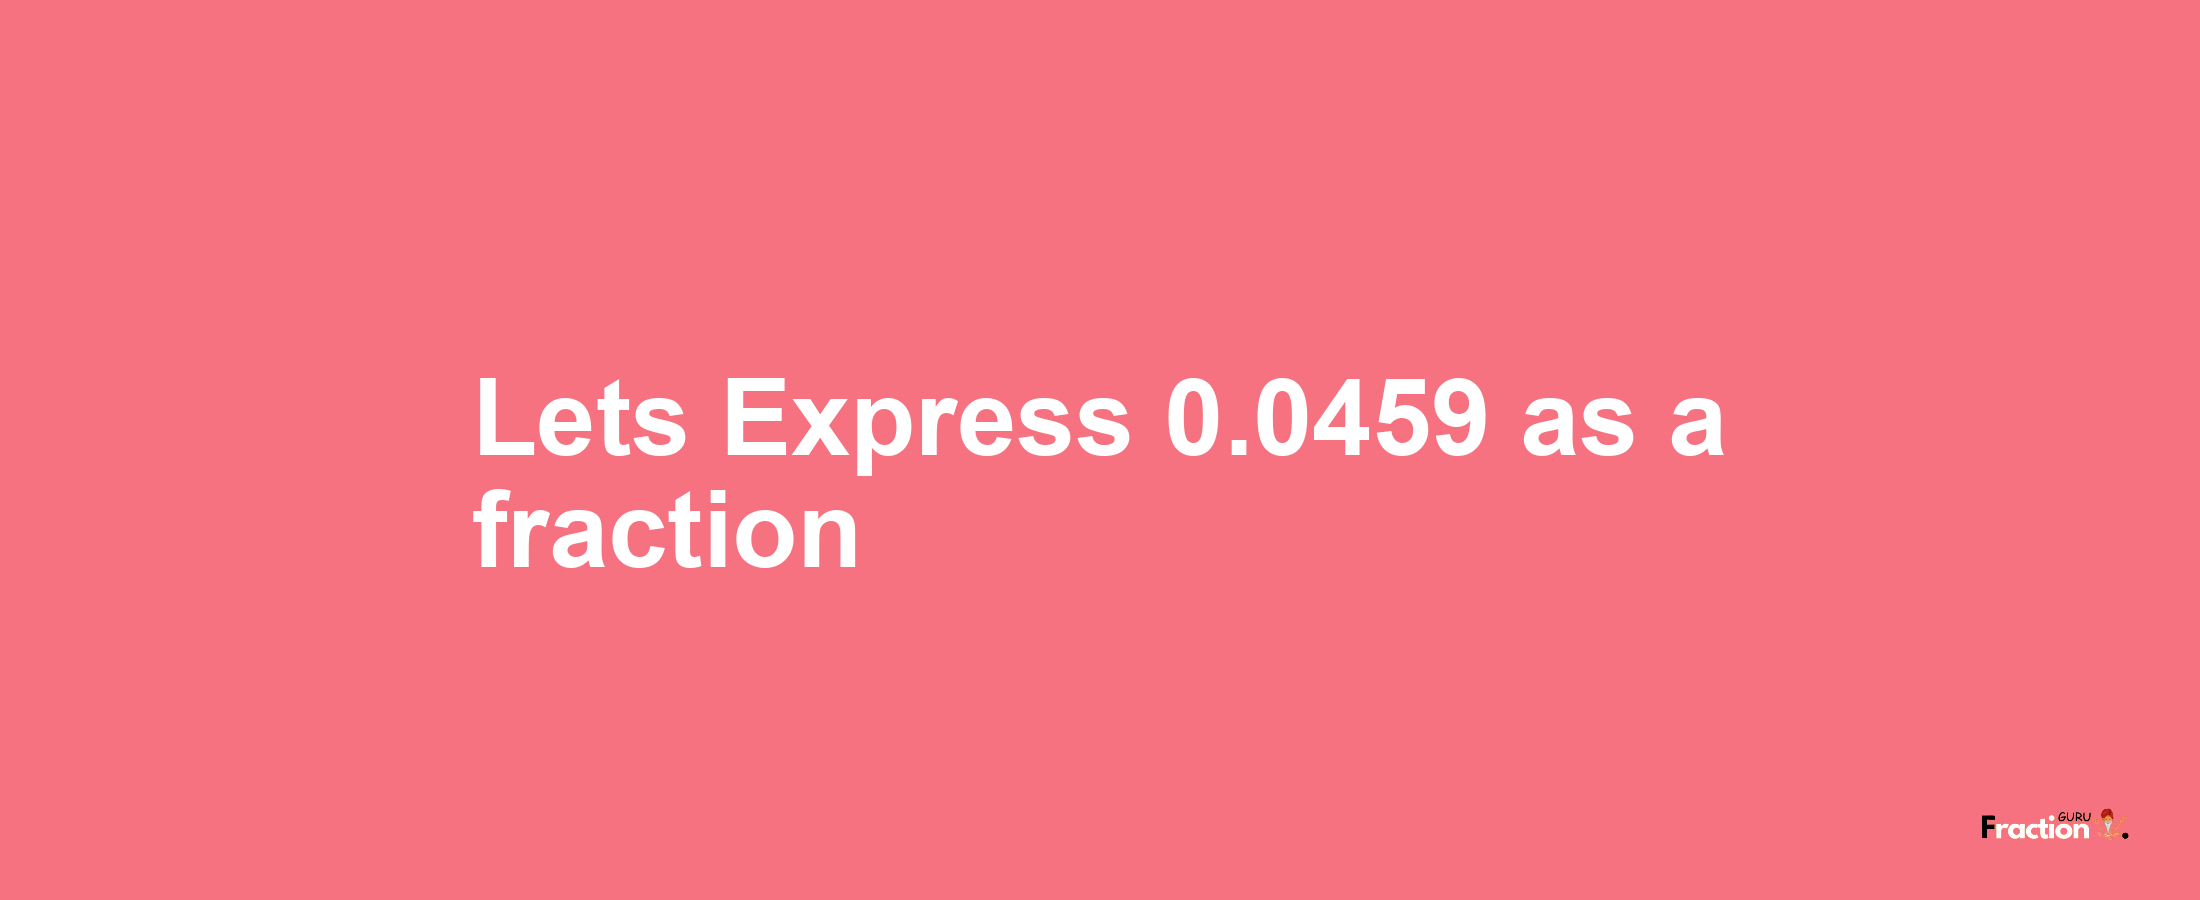 Lets Express 0.0459 as afraction